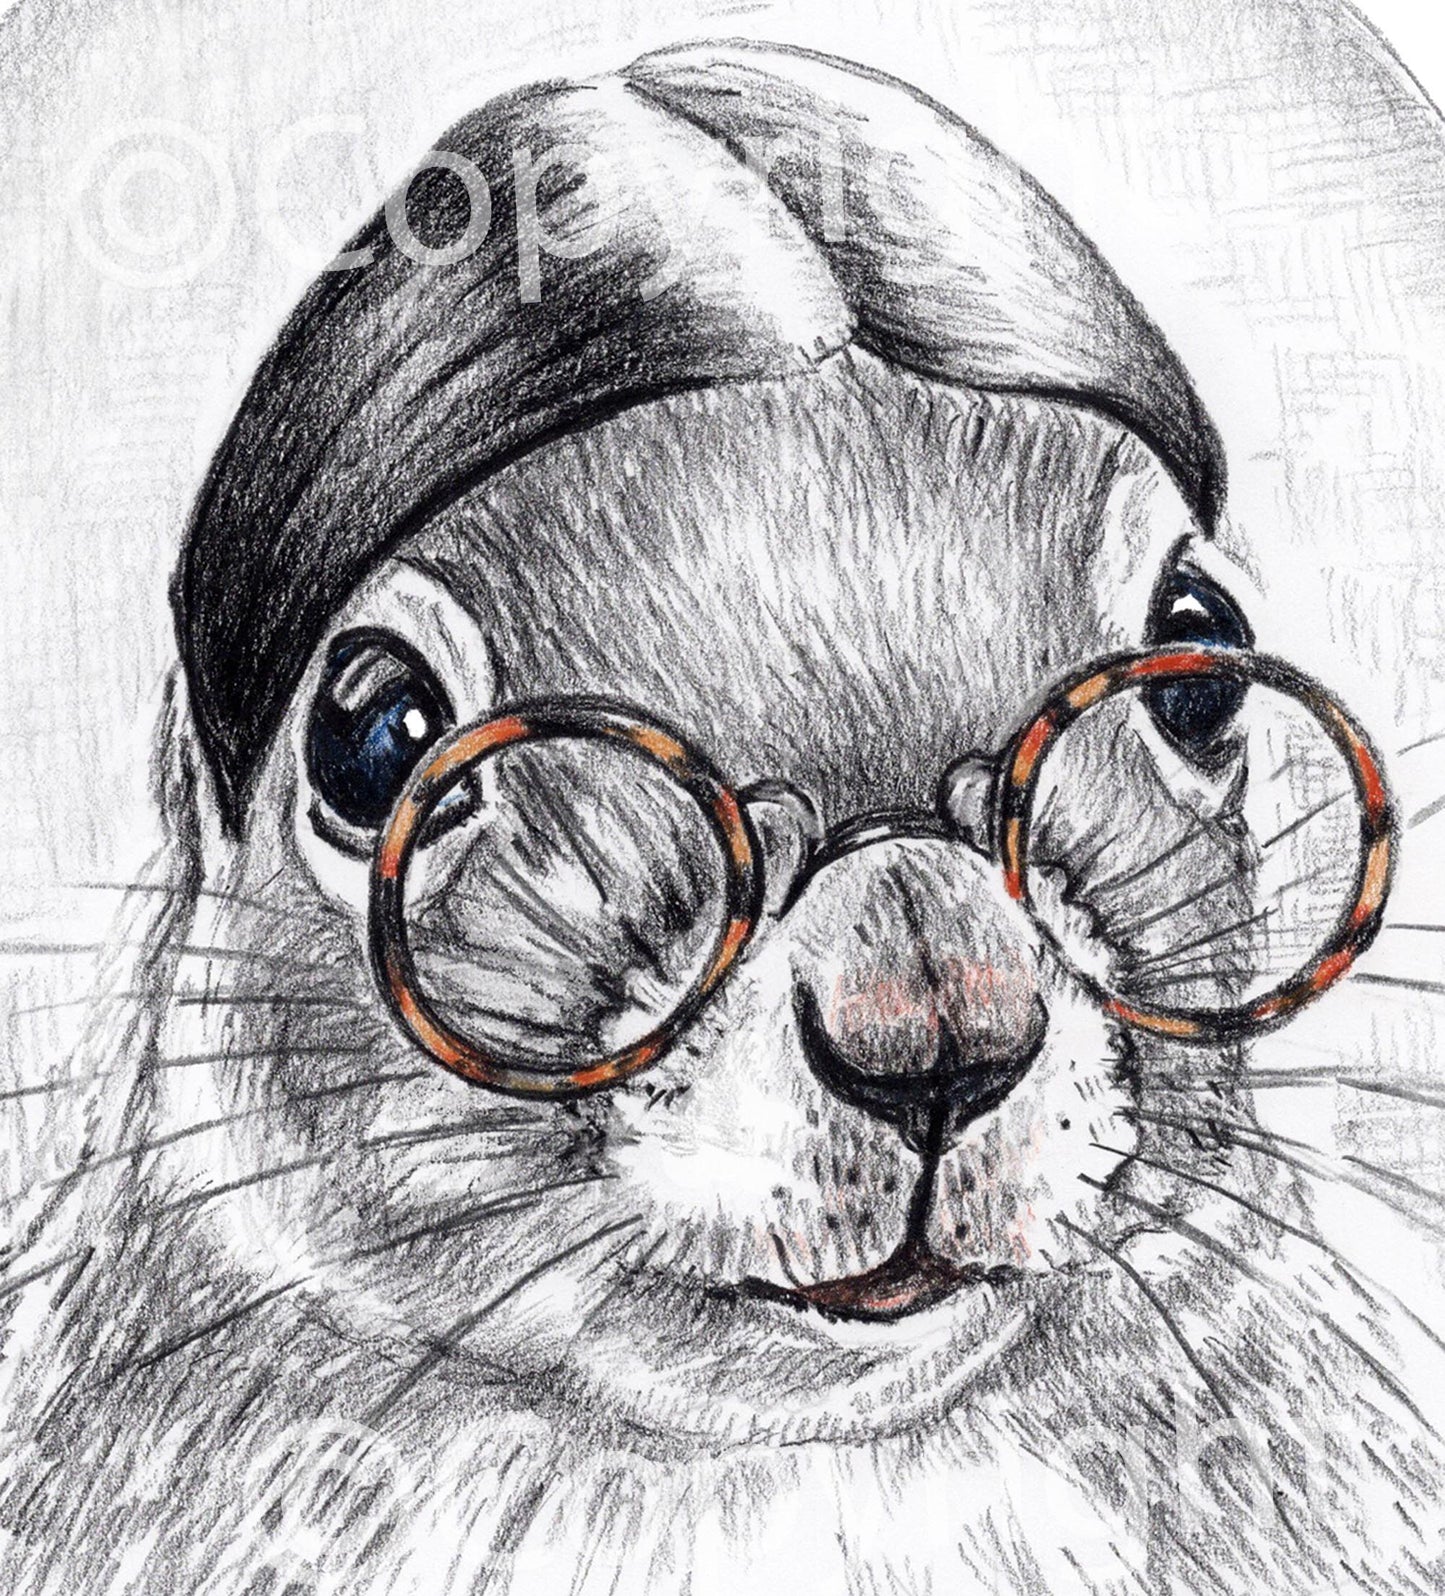 Crayon drawing of a mild mannered squirrel with slicked hair and round glasses. Art by Deidre Wicks